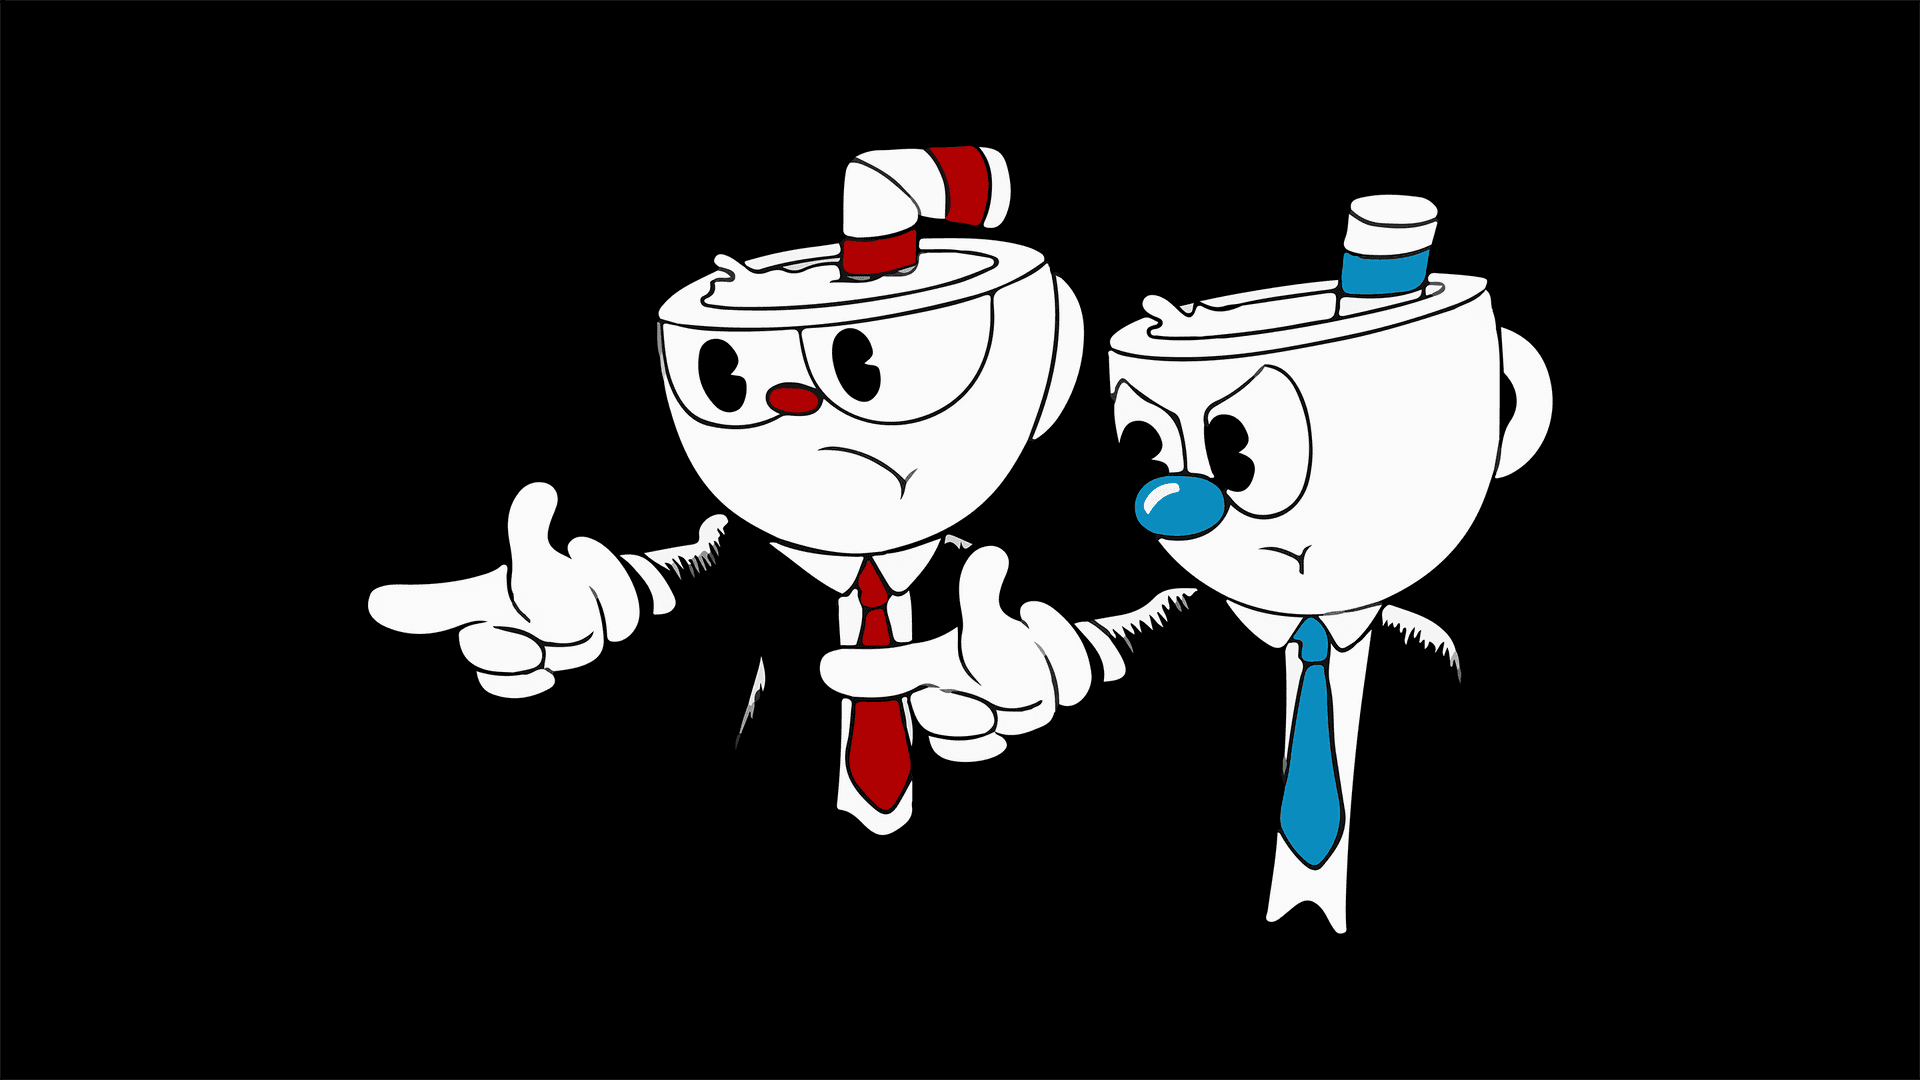 The brave brothers, Cuphead and Mugman, take on the devilish King Dice in a cross-country adventure!